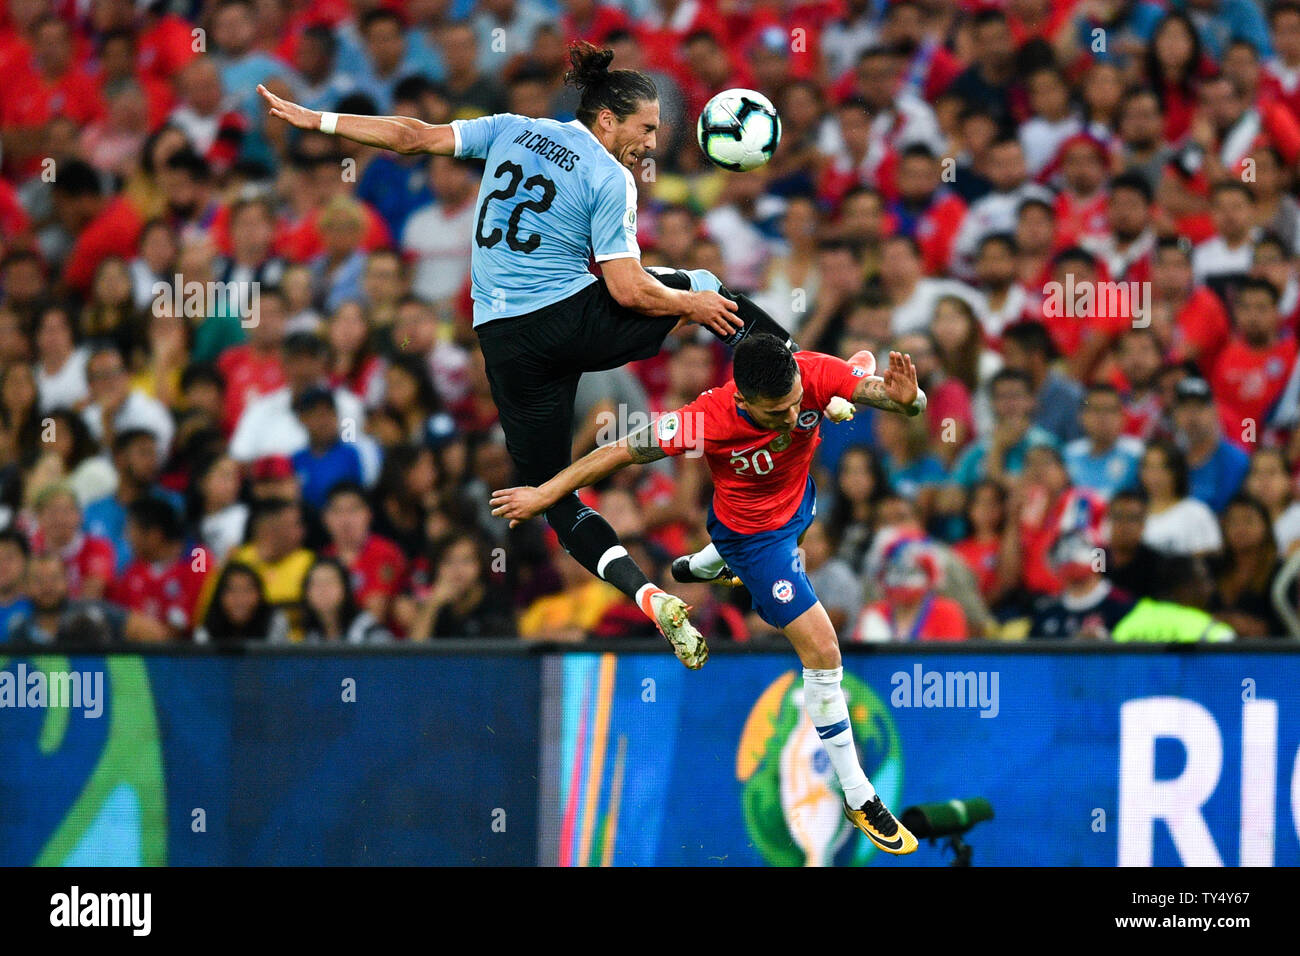 Beijing, Brazil. 24th June, 2019. Uruguay's Martin Caceres (L) vies with Charles Aranguiz of Chile during the Copa America 2019 Group C match between Uruguay and Chile in Rio de Janeiro, Brazil, June 24, 2019. Uruguay won 1-0. Credit: Xin Yuewei/Xinhua/Alamy Live News Stock Photo